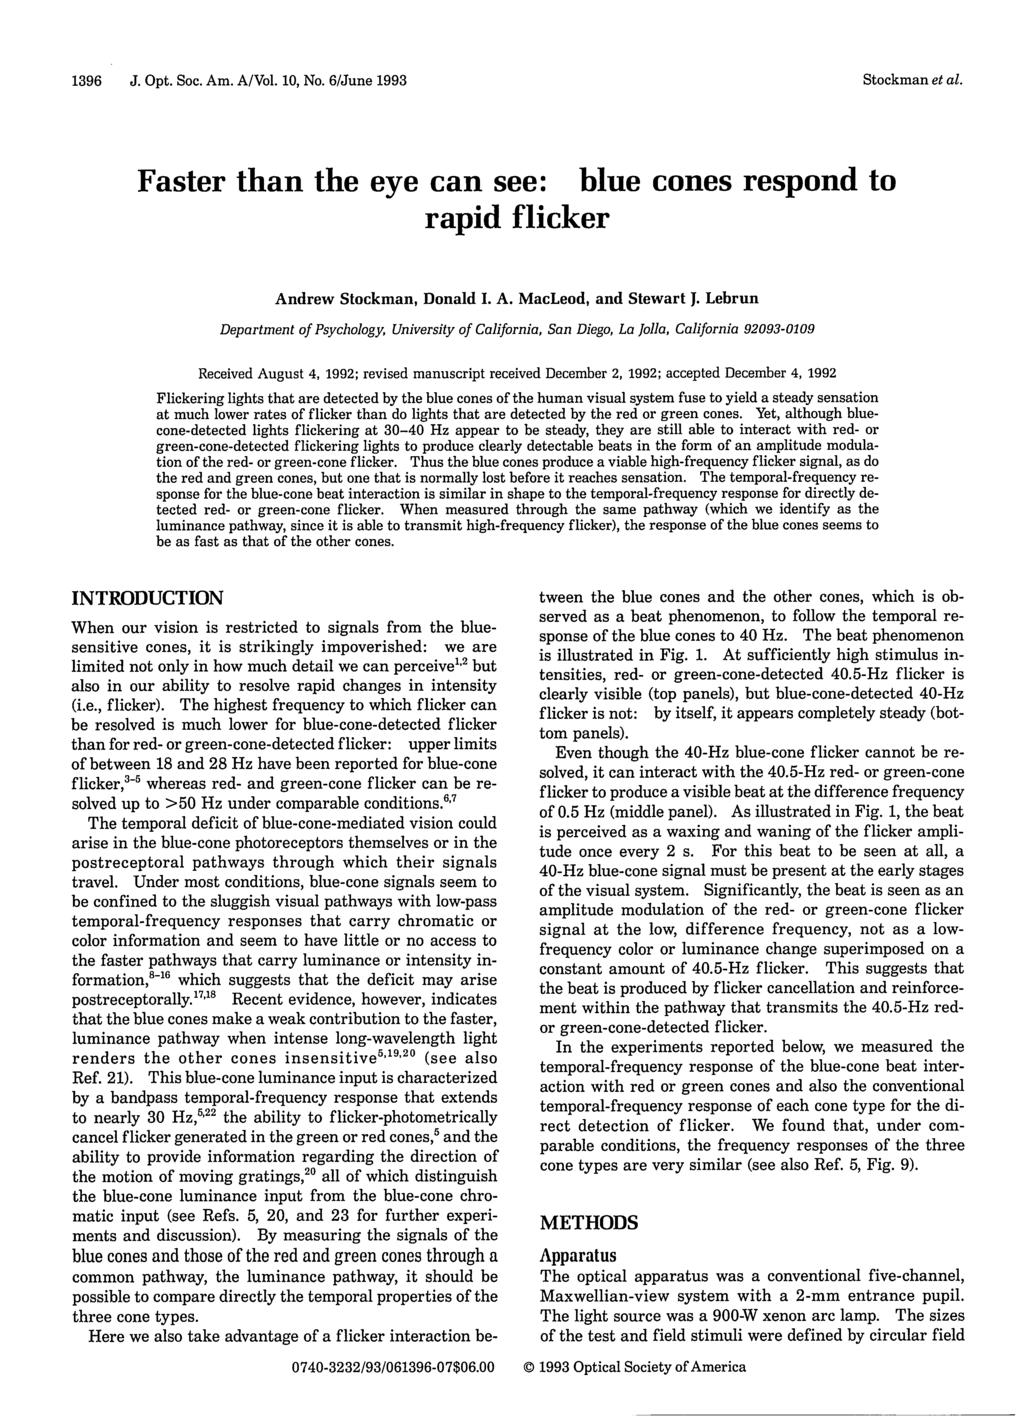 1396 J. Opt. Soc. Am. A/Vol. 1, No. 6/June 1993 Faster than the eye can see: blue cones respond to rapid flicker Andrew Stockman, Donald I. A. MacLeod, and Stewart J.